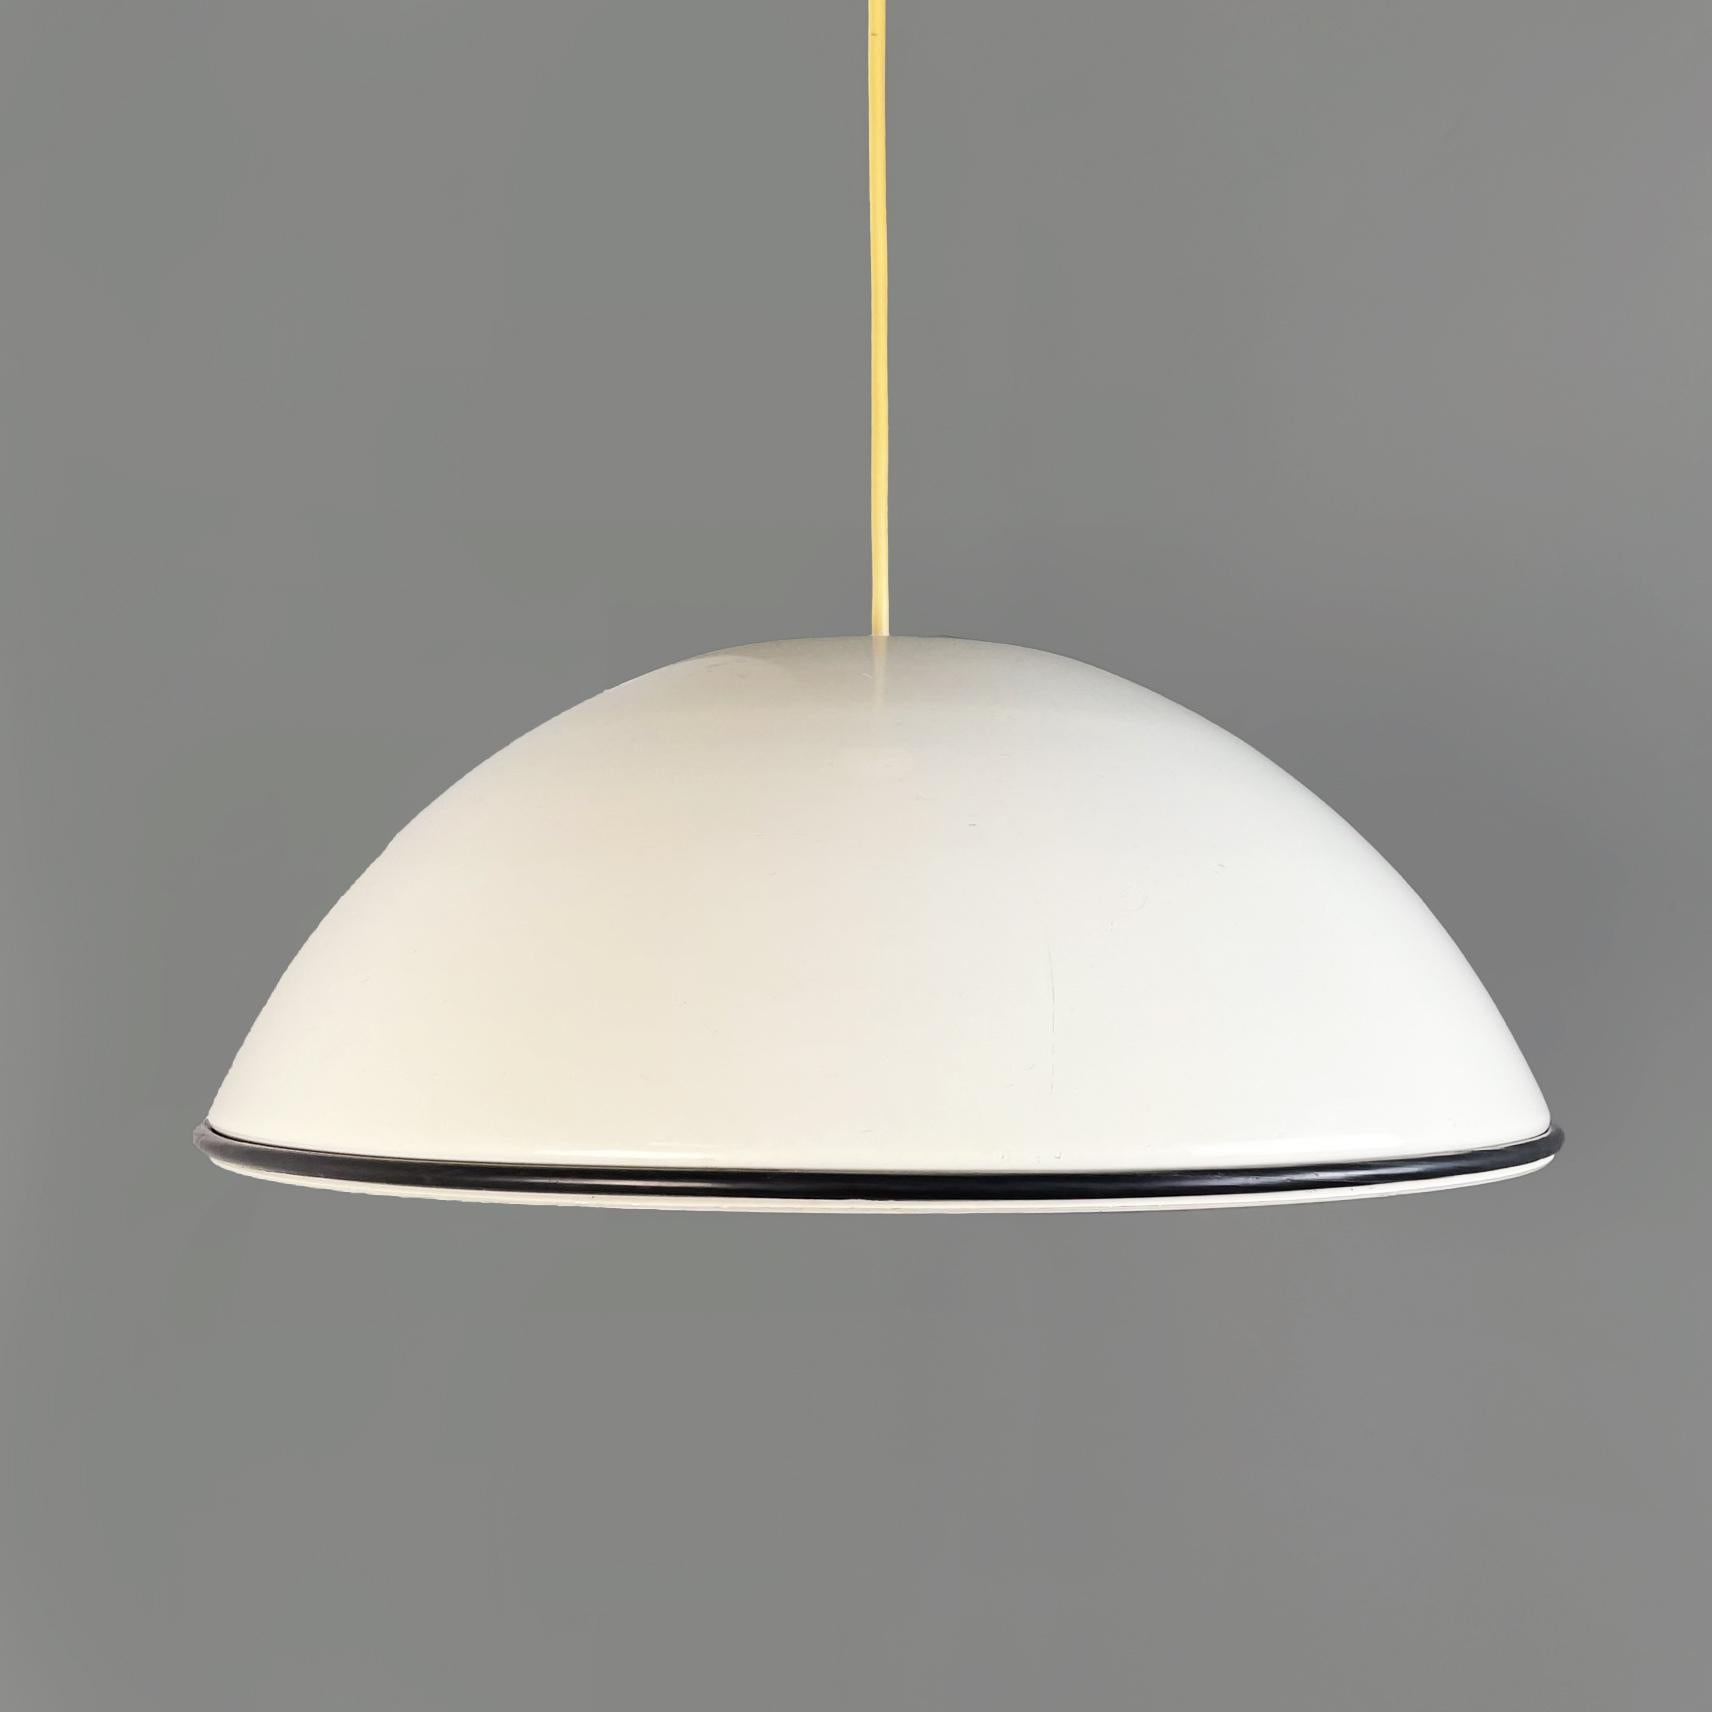 Mid-Century Modern Italian Mid-Century Metal Suspension Lamp Relemme by Castiglioni for Flos, 1970s